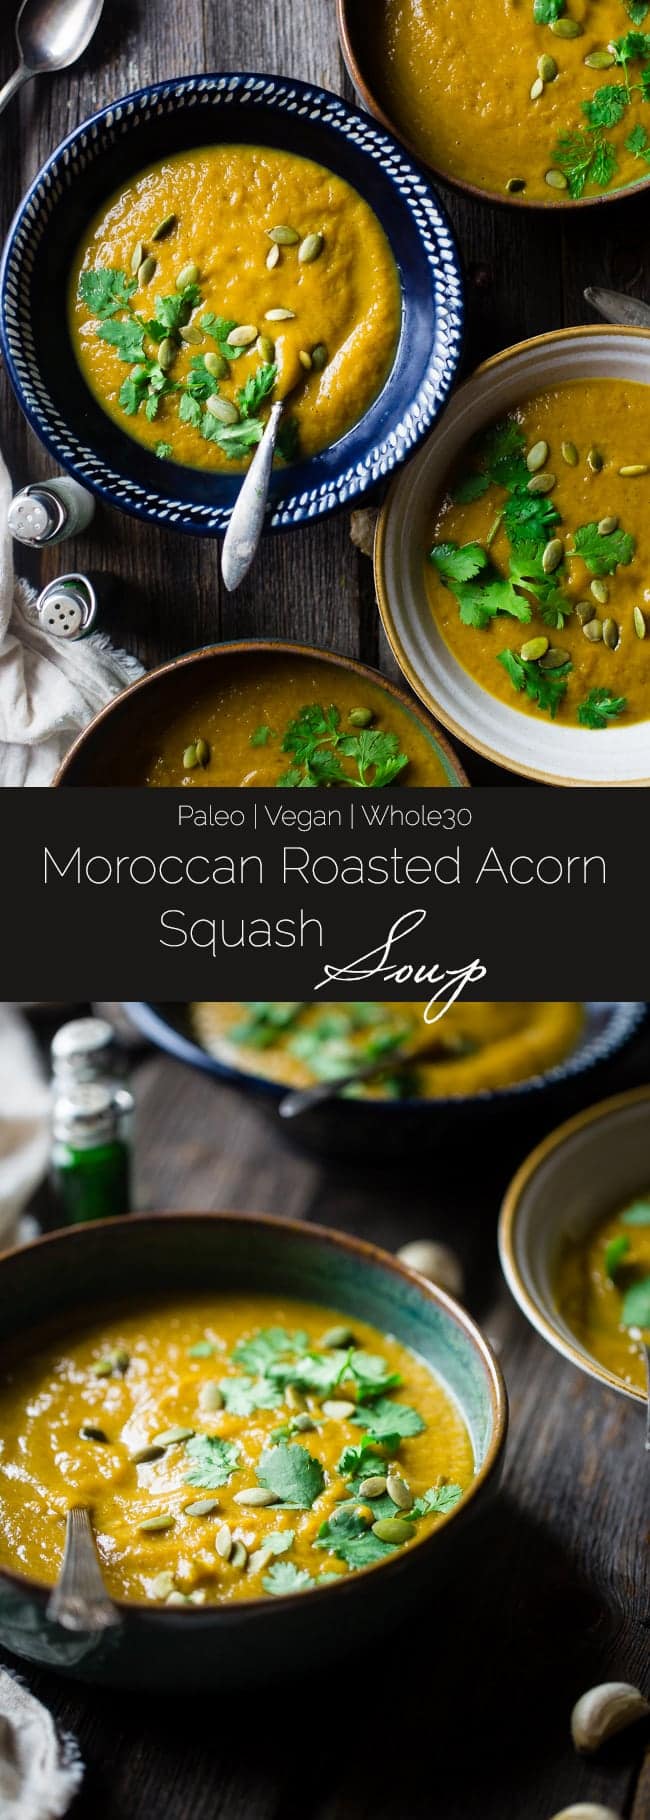 Vegan Moroccan Roasted Acorn Squash Soup - This easy soup is bursting with spices, and is sweetened with dates! It's a healthy, whole30 compliant, paleo meal for only 200 calories! | Foodfaithfitness.com | @FoodFaithFit